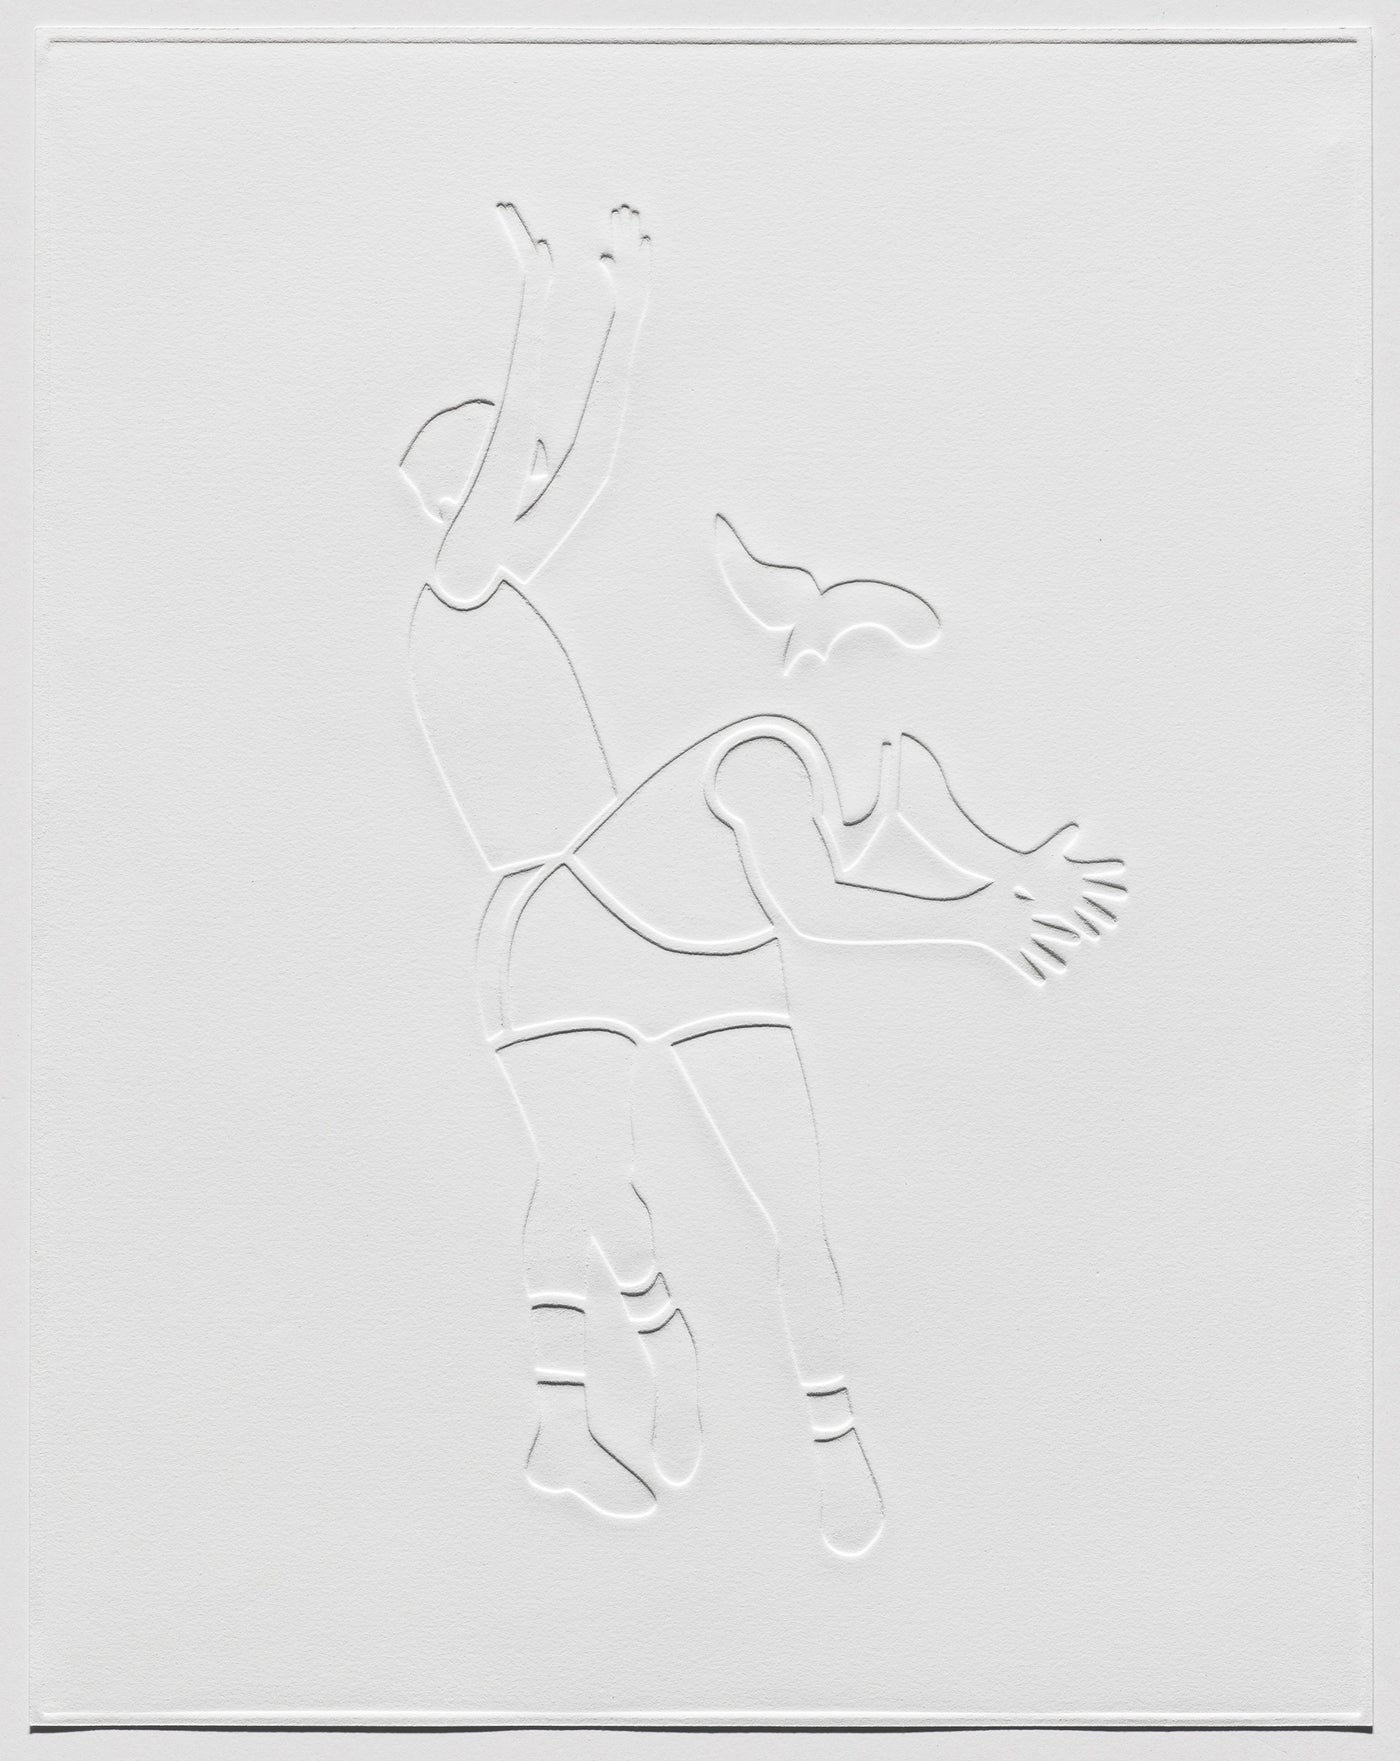 "Two Play Basketball", 18 1/4 x 14 1/4”, debossed relief print on BFK Rives white 280gsm, 2022